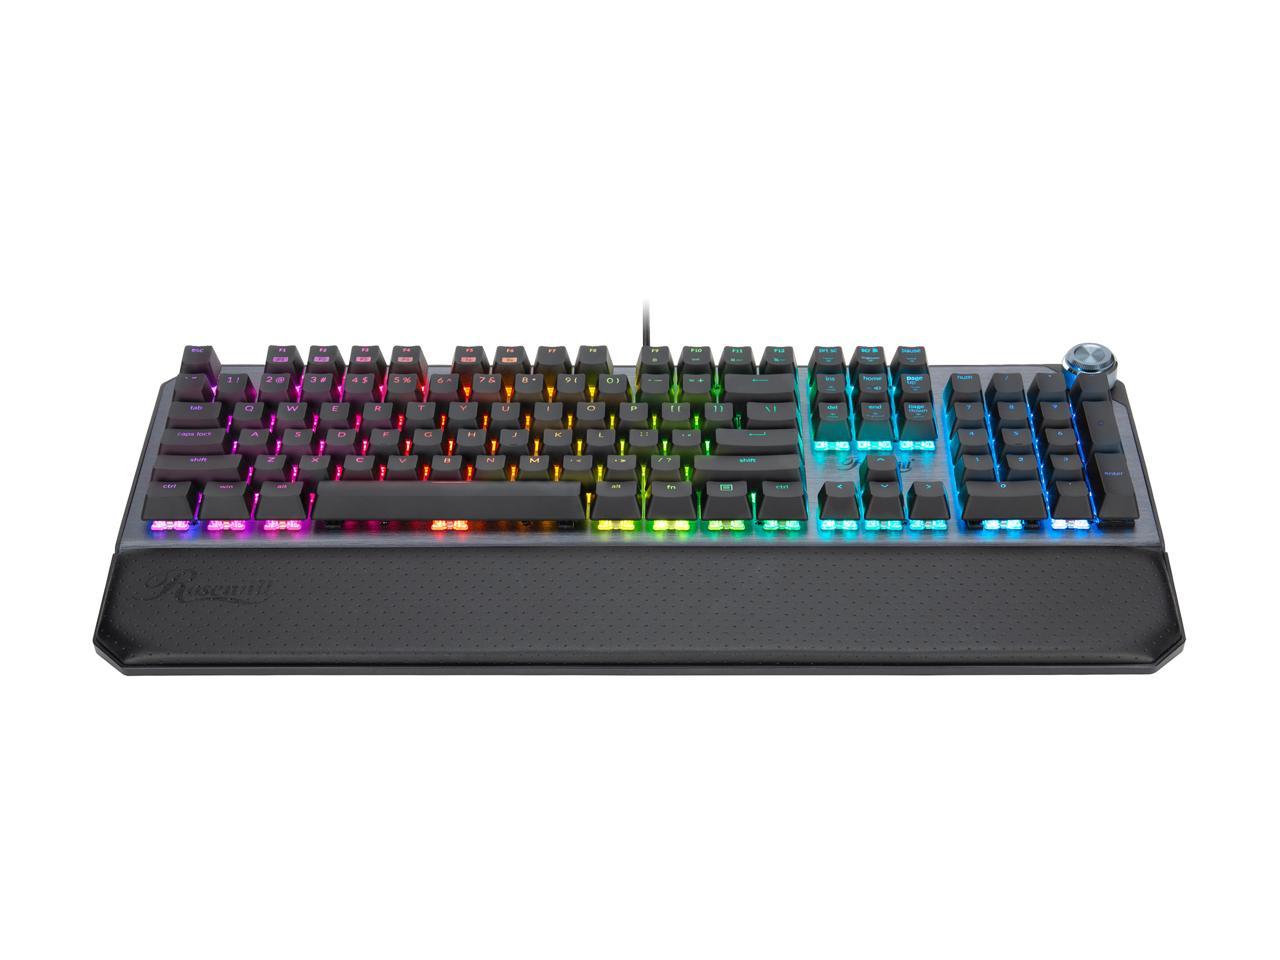 Rosewill NEON K91 RGB S Mechanical Gaming Keyboard with Cherry MX Silver Switches, RGB Underglow and 17 Backlit Modes, Multifunctional Dial Control, Wrist Rest and PBT Keycap Set